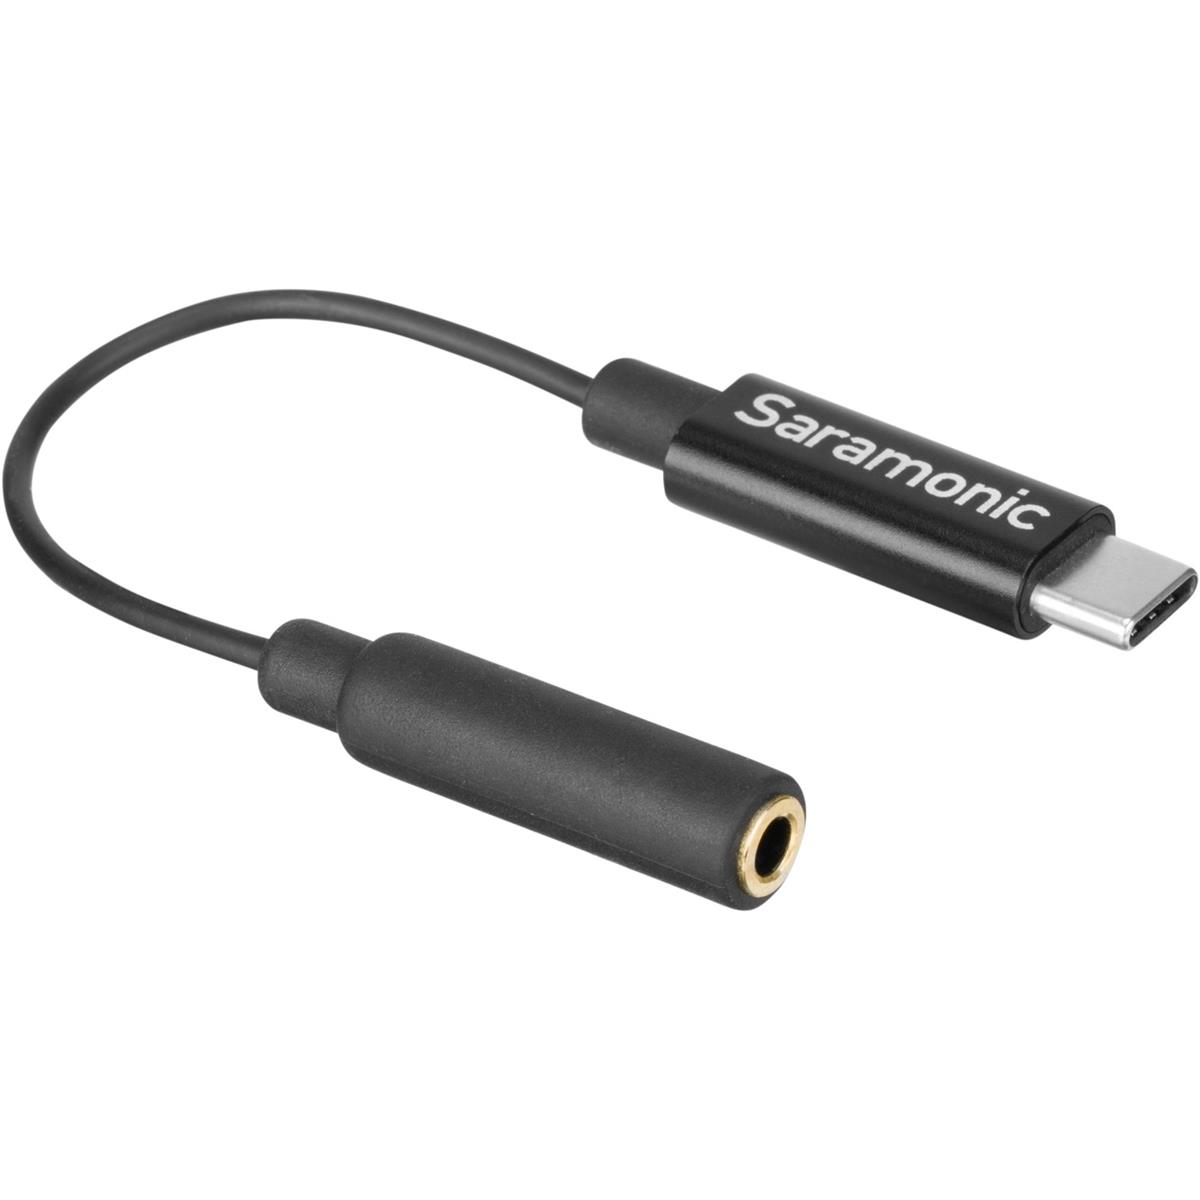 Saramonic SR-C2003 3.5mm TRS Female to USB Type-CAdapter Cable for Mono/Stereo Audio to Android (3")